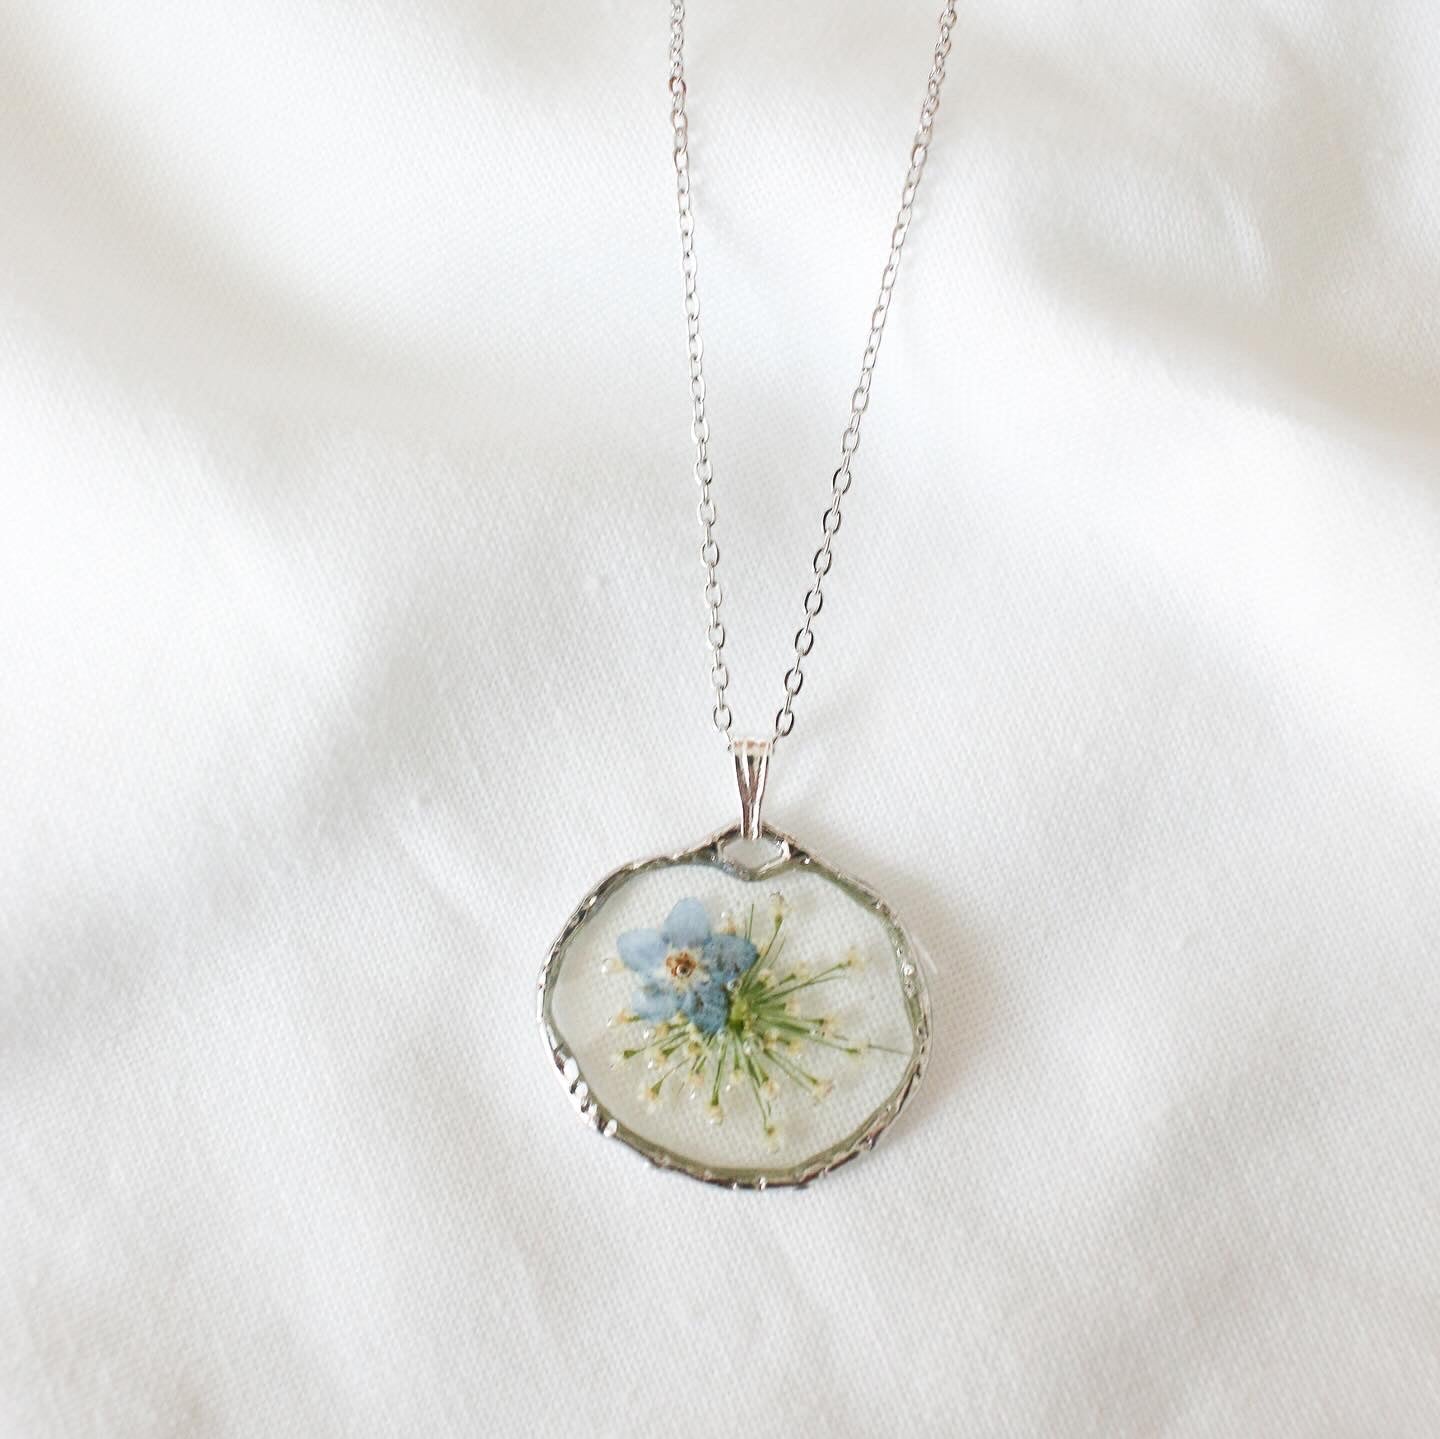 The Trouvaille Blue Forget Me Not Necklace in Silver